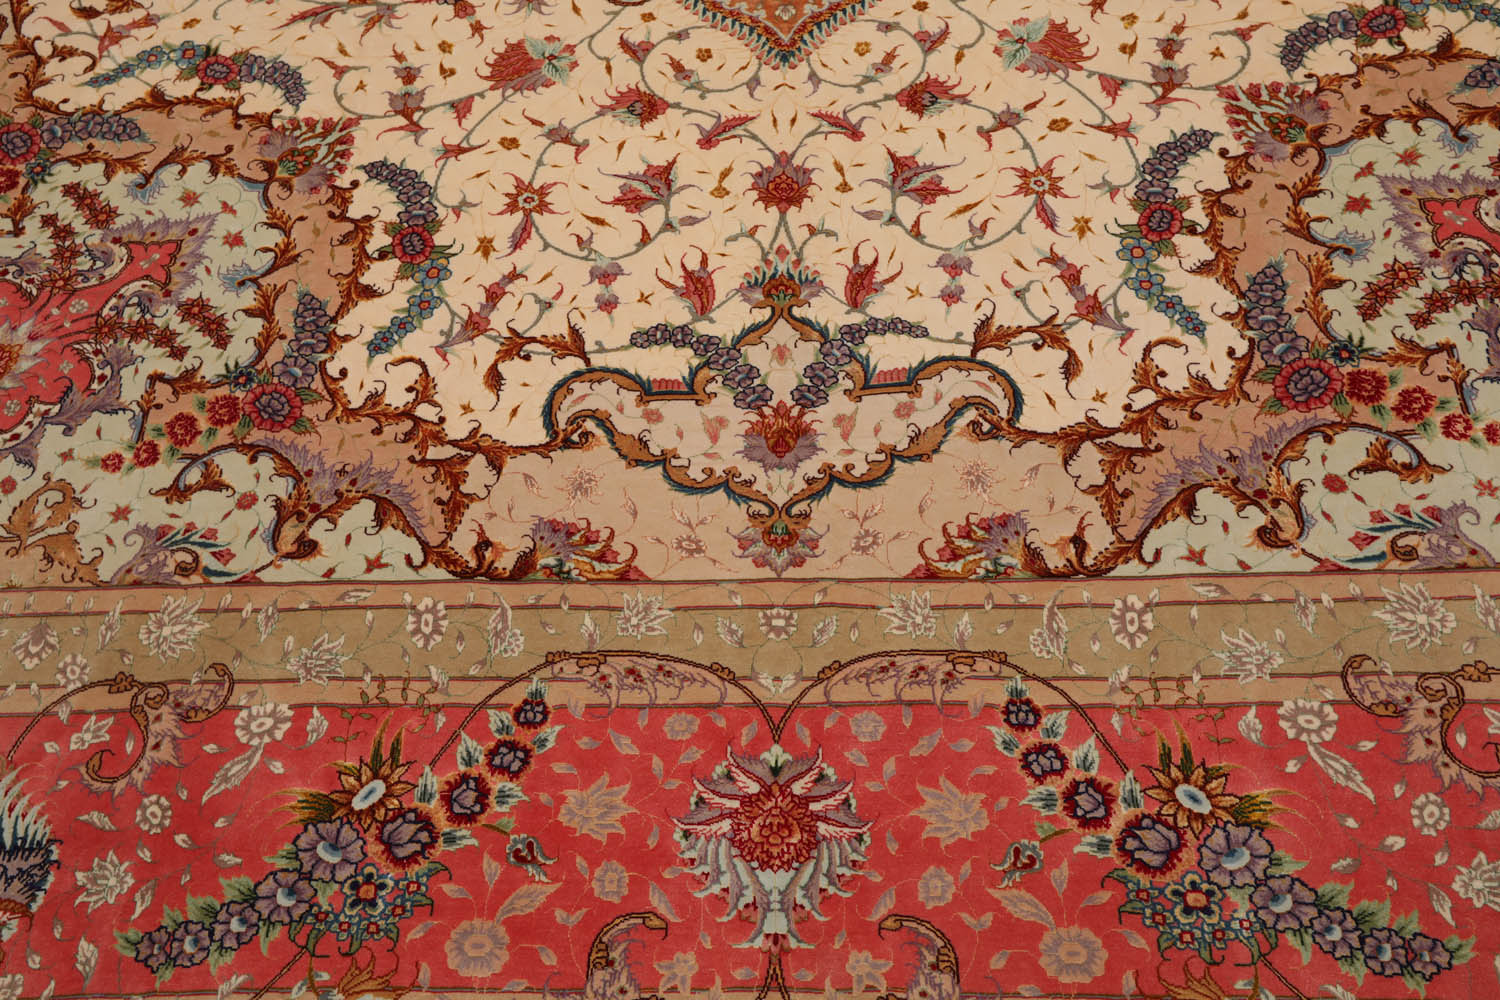 Annunciato Palace Hand Knotted Wool and Silk Traditional Palace Tabriz 350 KPSI Master Weaver Signed Oriental Area Rug Ivory, Rose Color